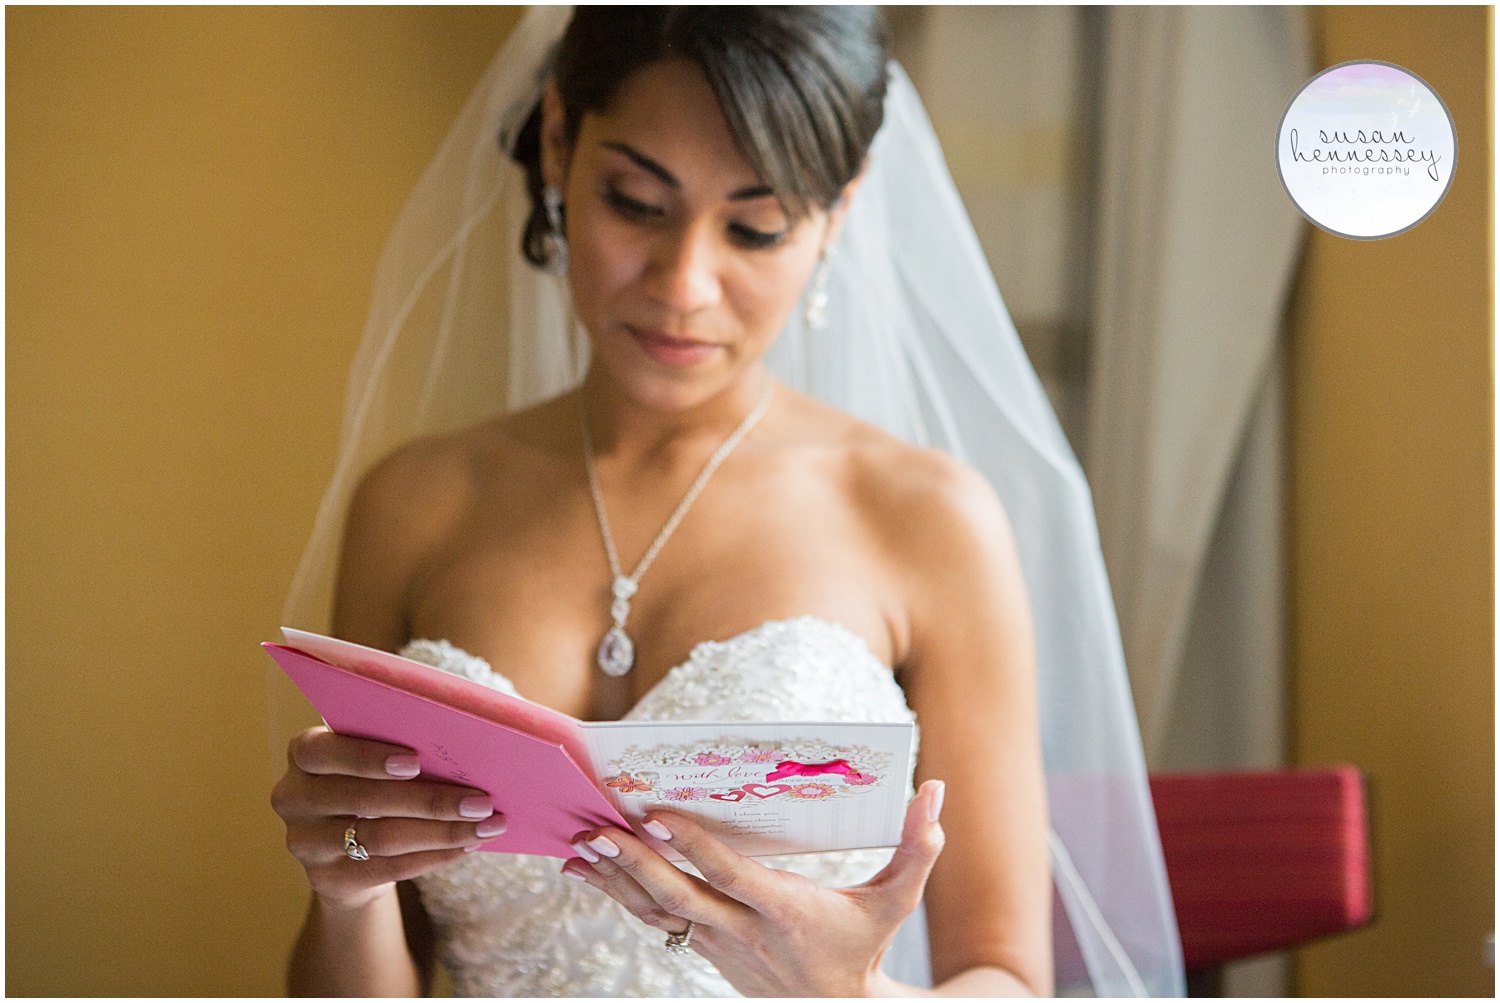 Bride reads an emotional card from her groom on their wedding day.